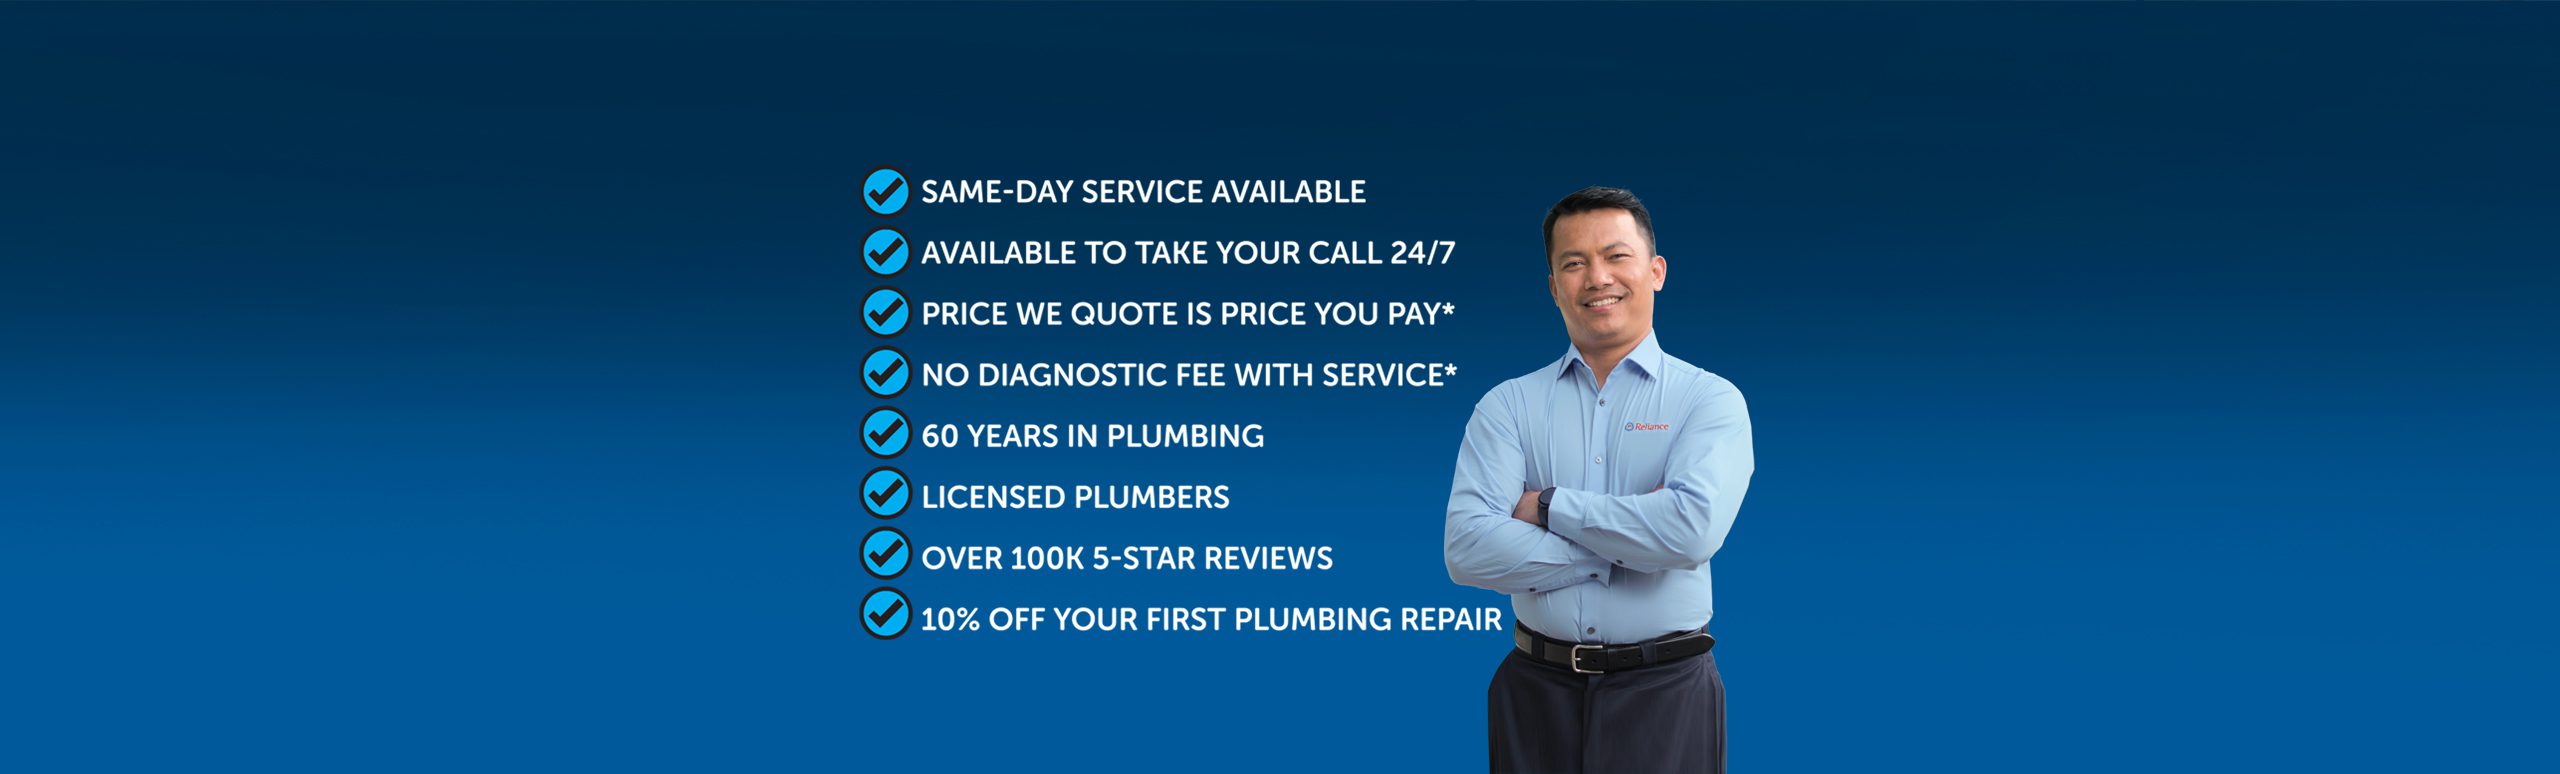 Checklist iteams are: Same-Day Service Available Price We Quote Is Price You Pay* No Diagnostic Fee With Service* 60 Years In Plumbing Over 100k 5-Star Reviews